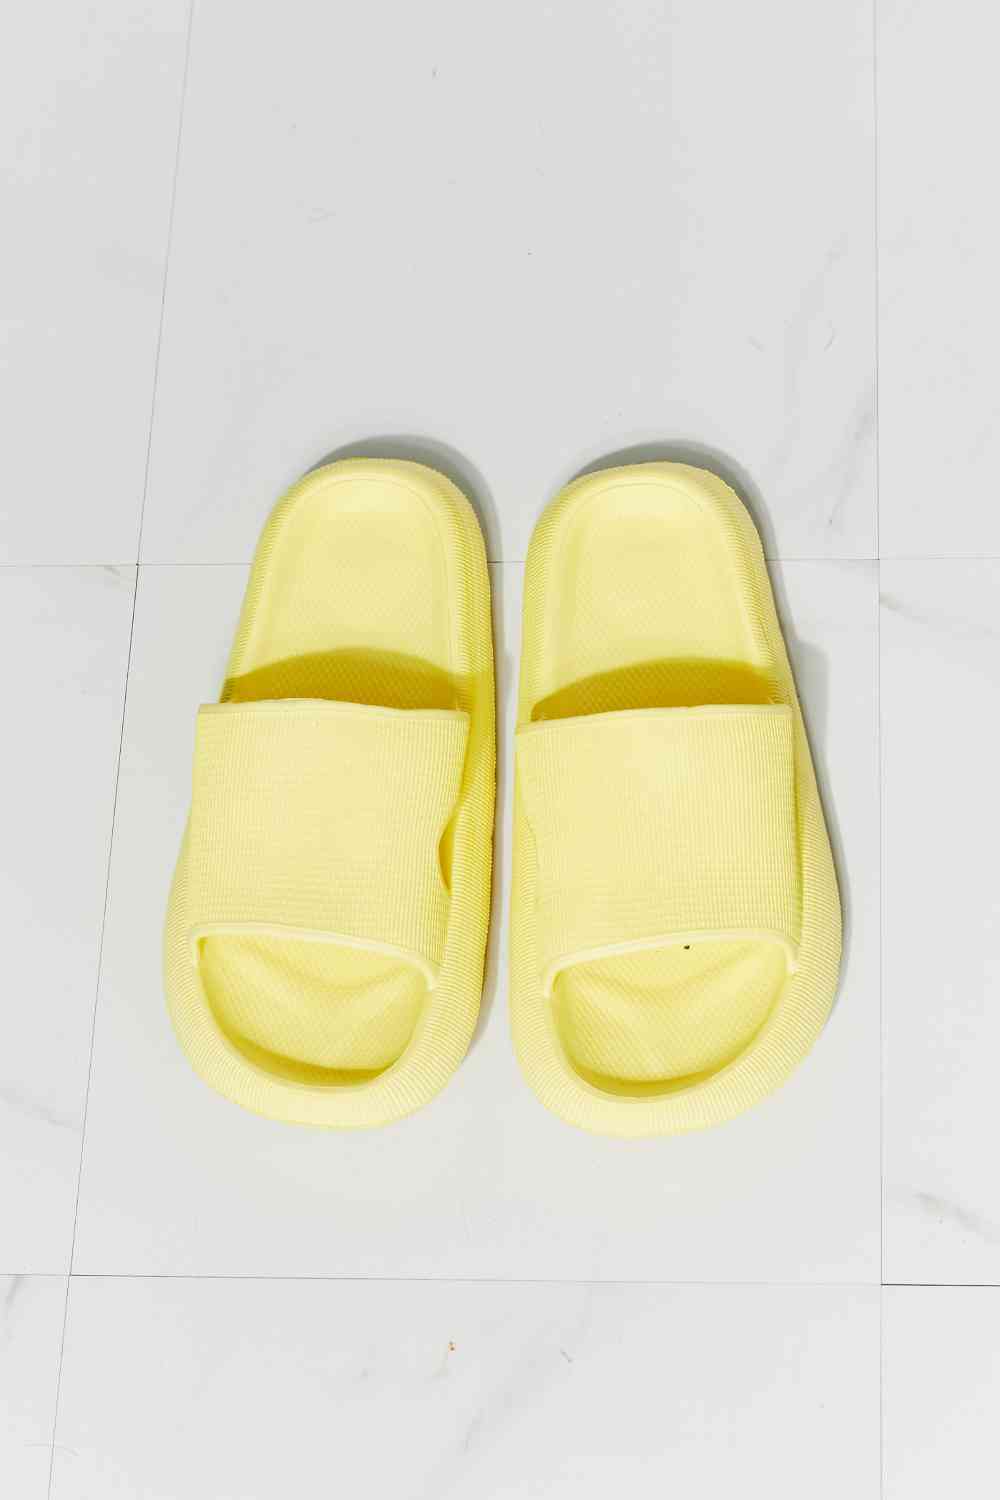 Arms Around Me Open Toe Slide in Yellow - Accessories - Shoes - 4 - 2024